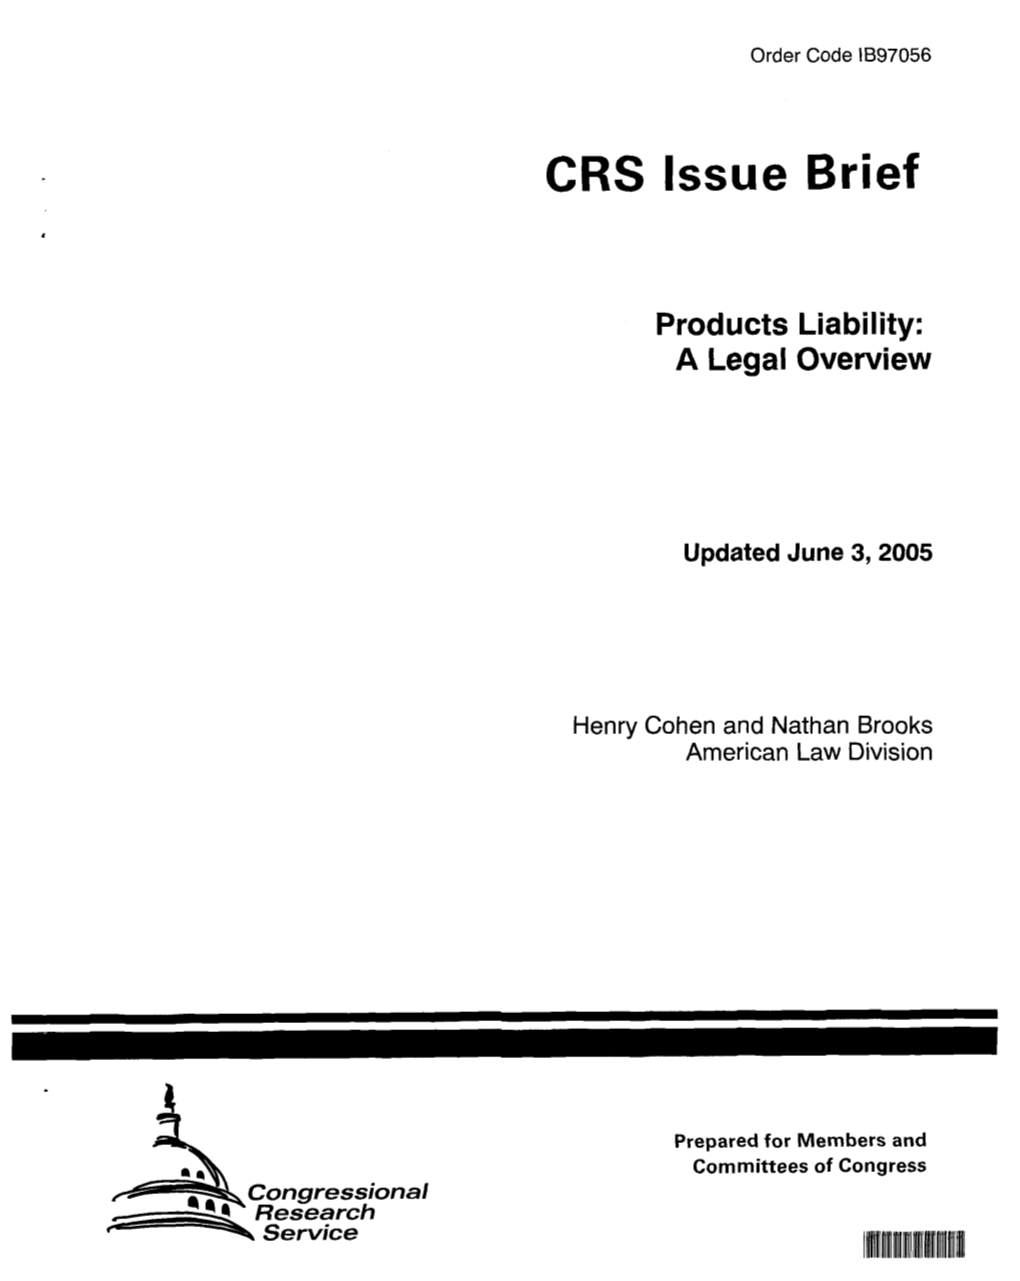 Products Liability: a Legal Overview